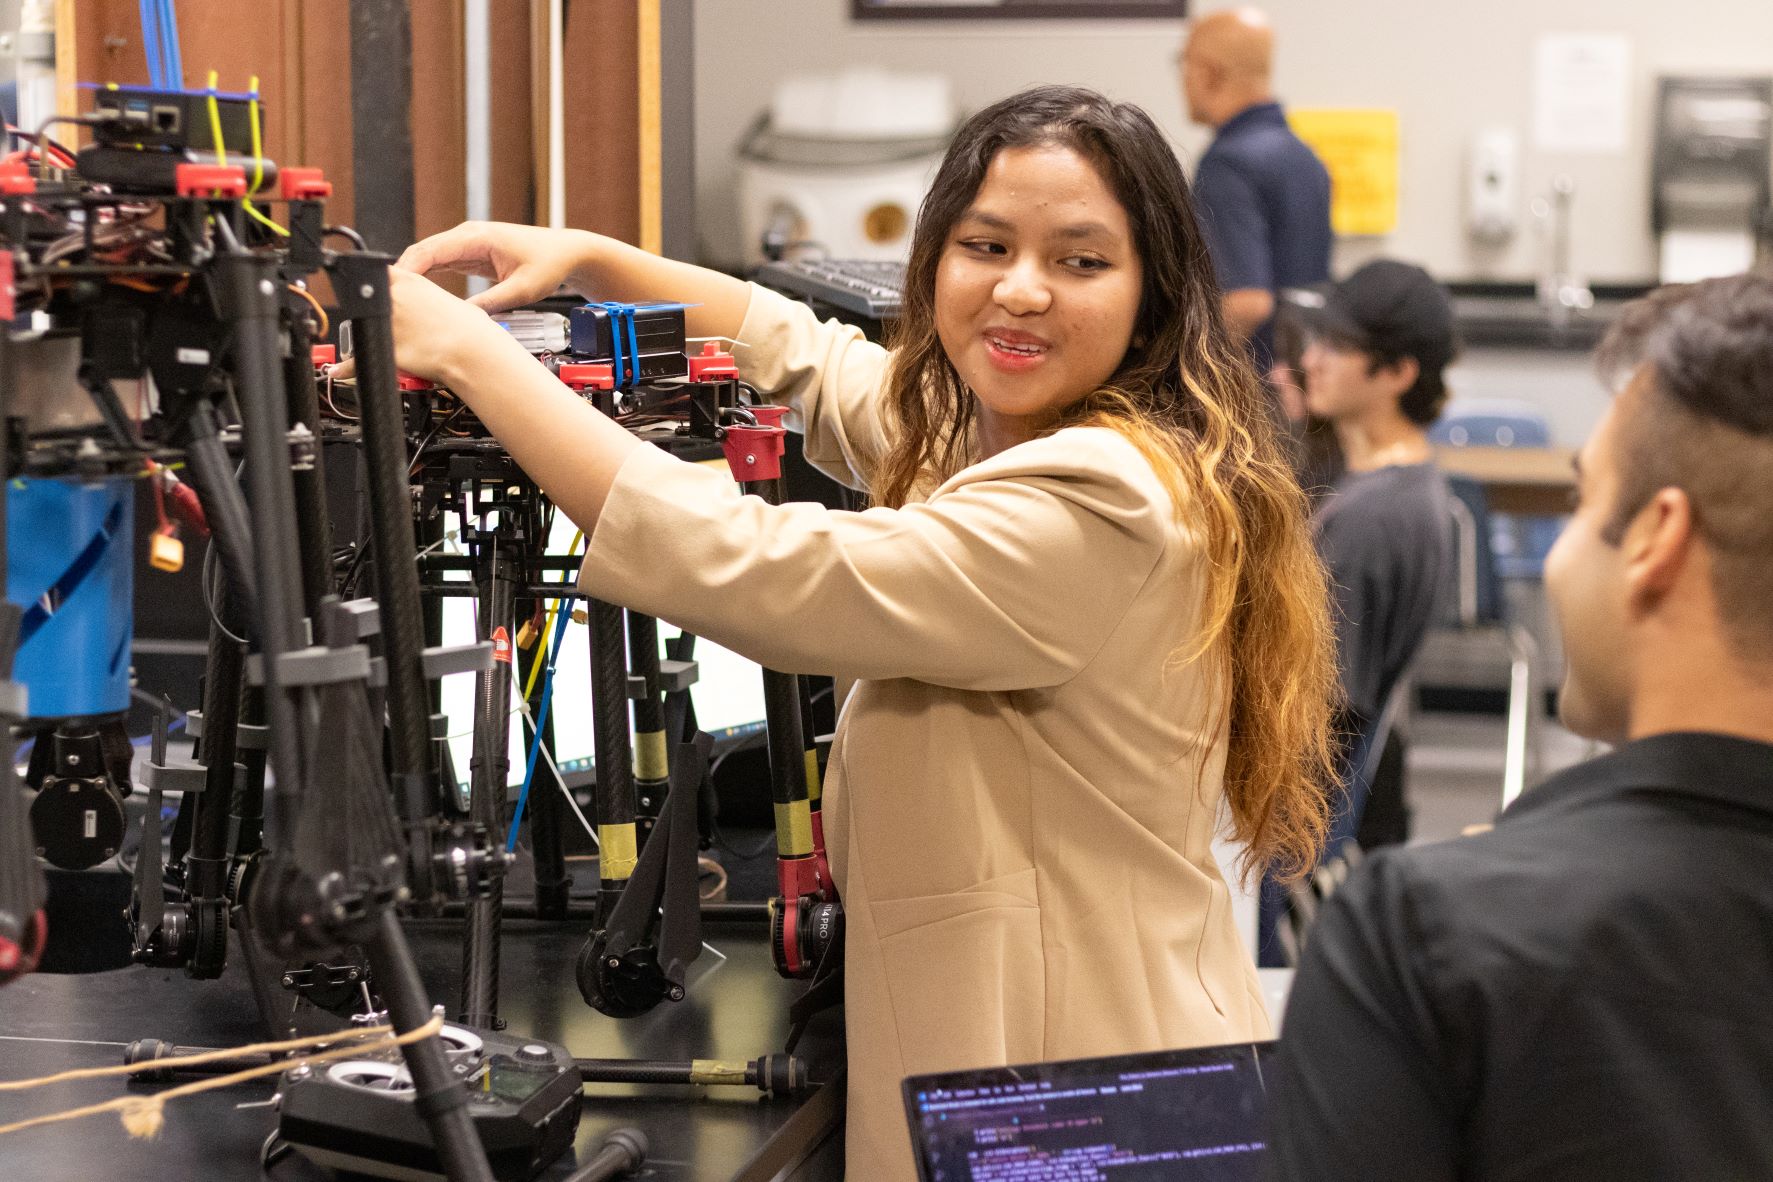 An engineering student named Eve Javier working on an unmanned autonomous vehicle.